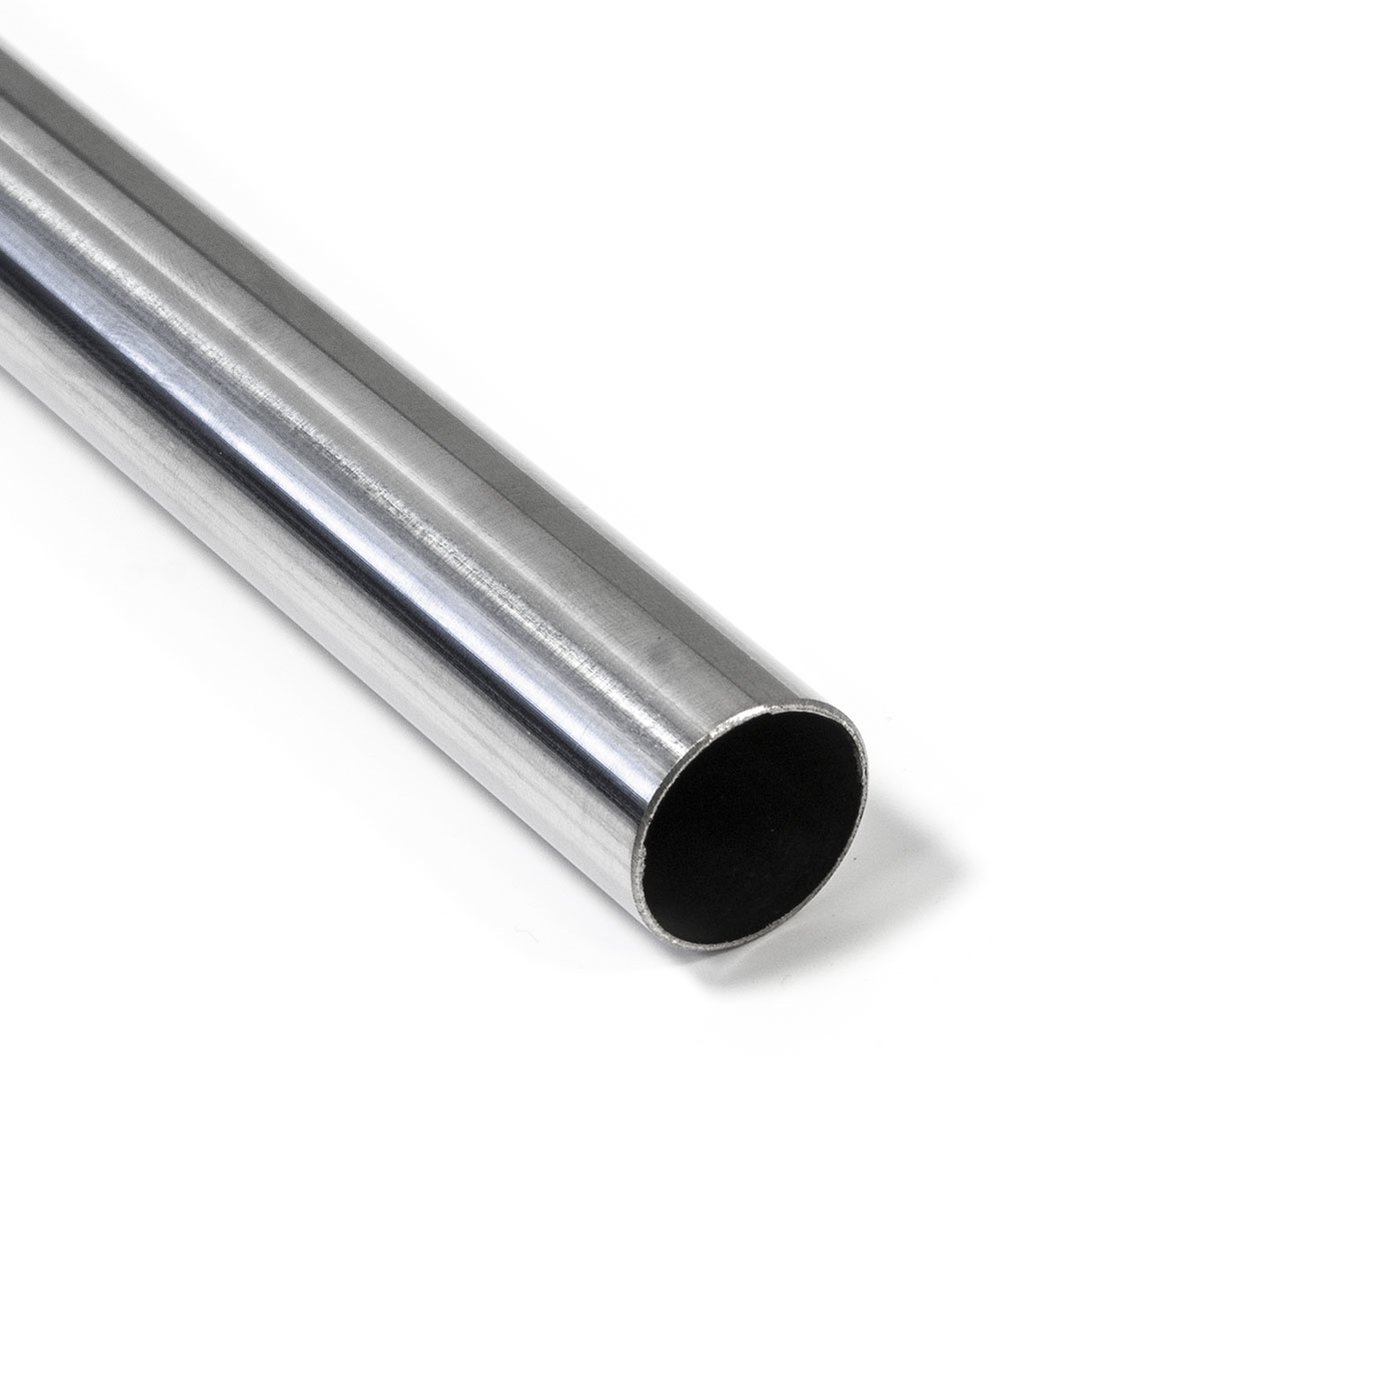 Thinwall Stainless Steel Tubing 28x0.6x1000 mm